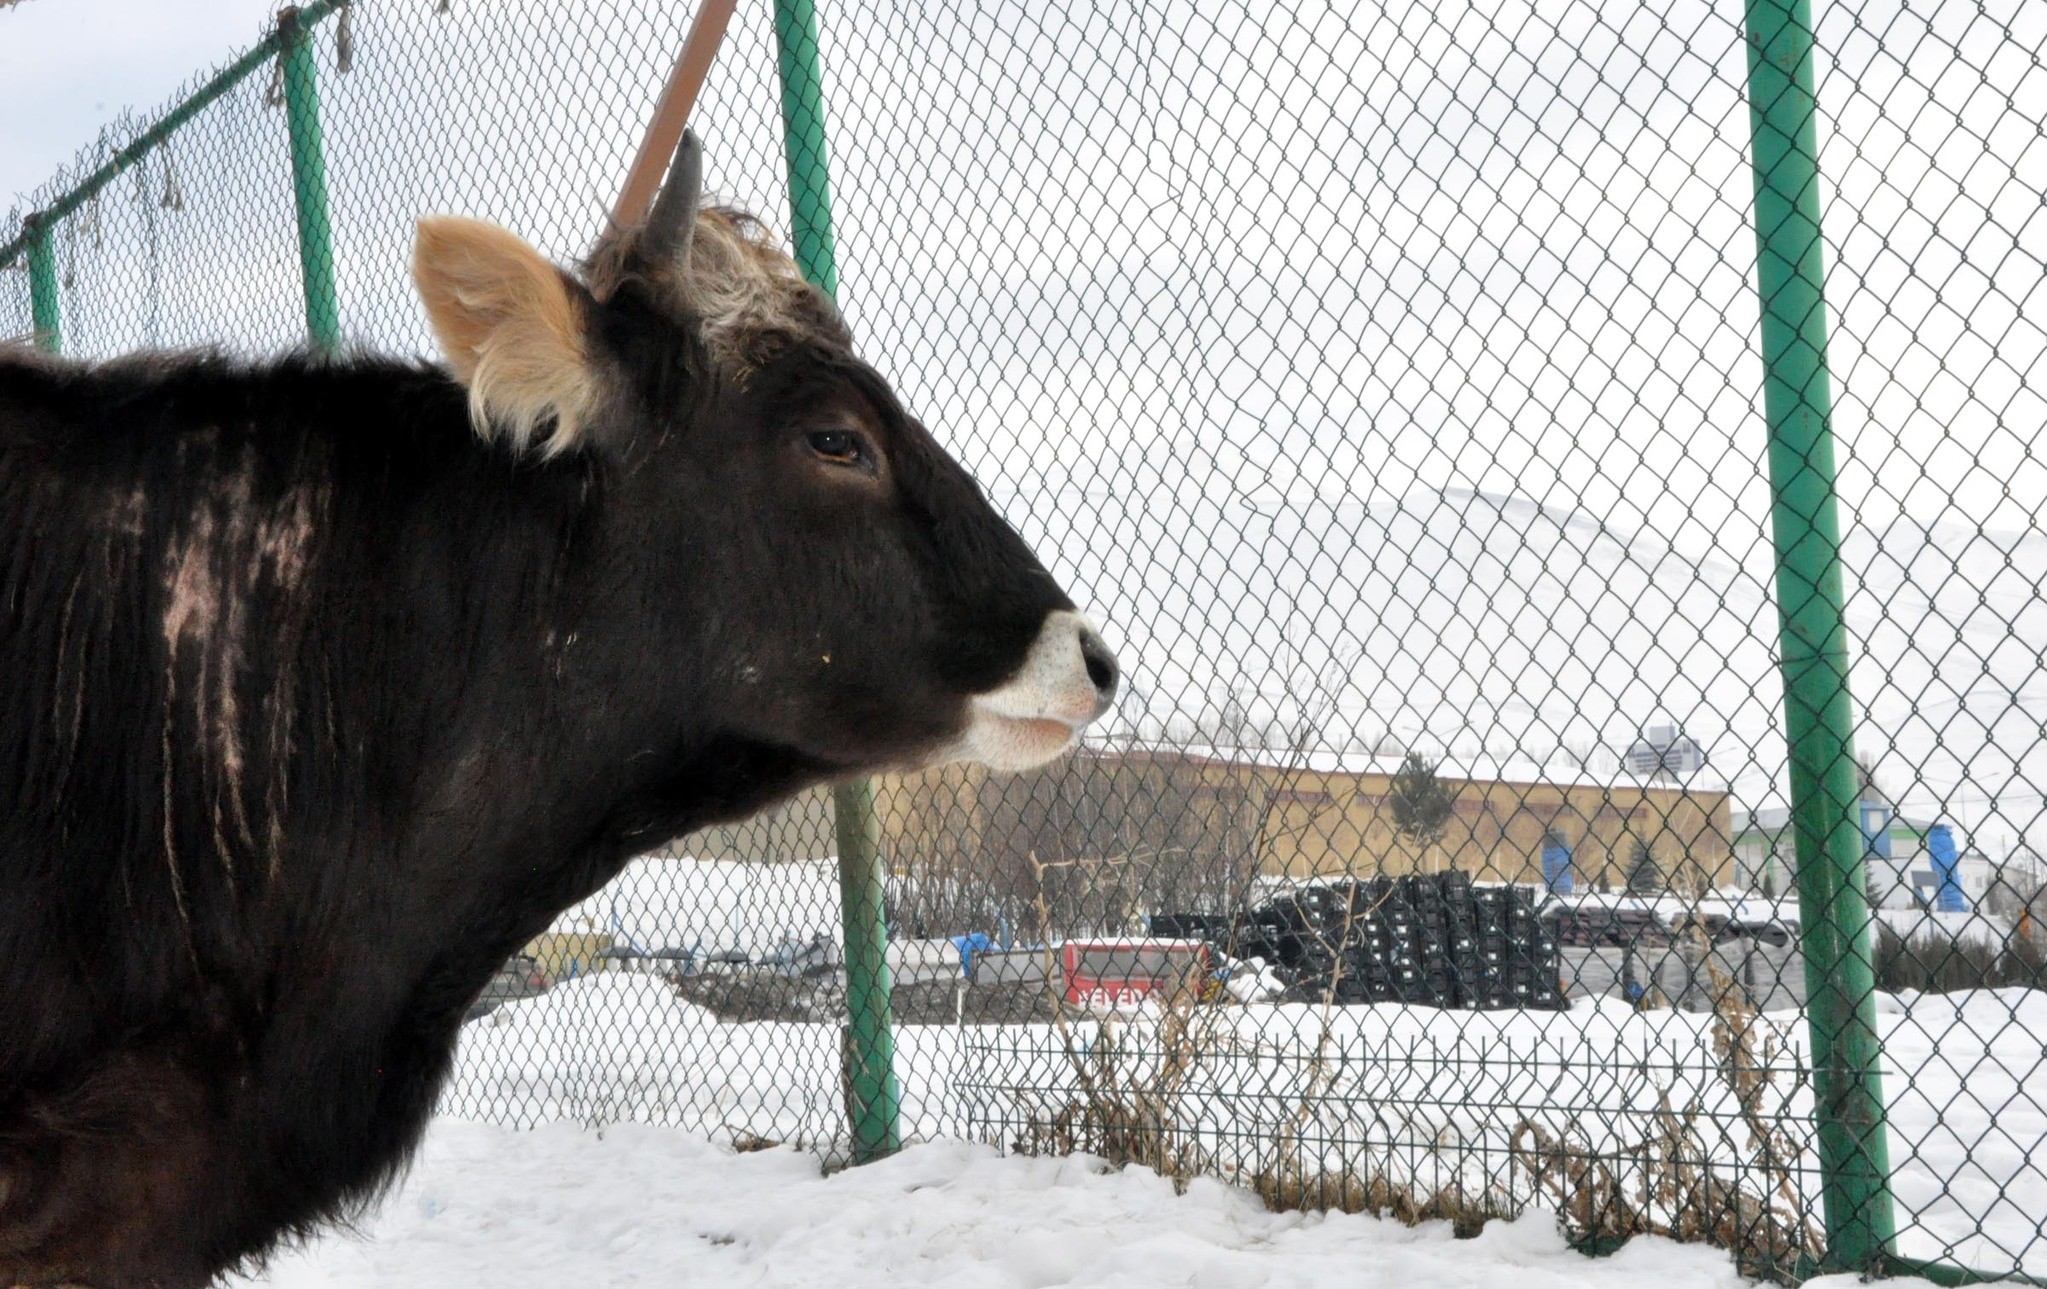 The cow gazes at the fences topped with barbed wire that surrounds its pen.